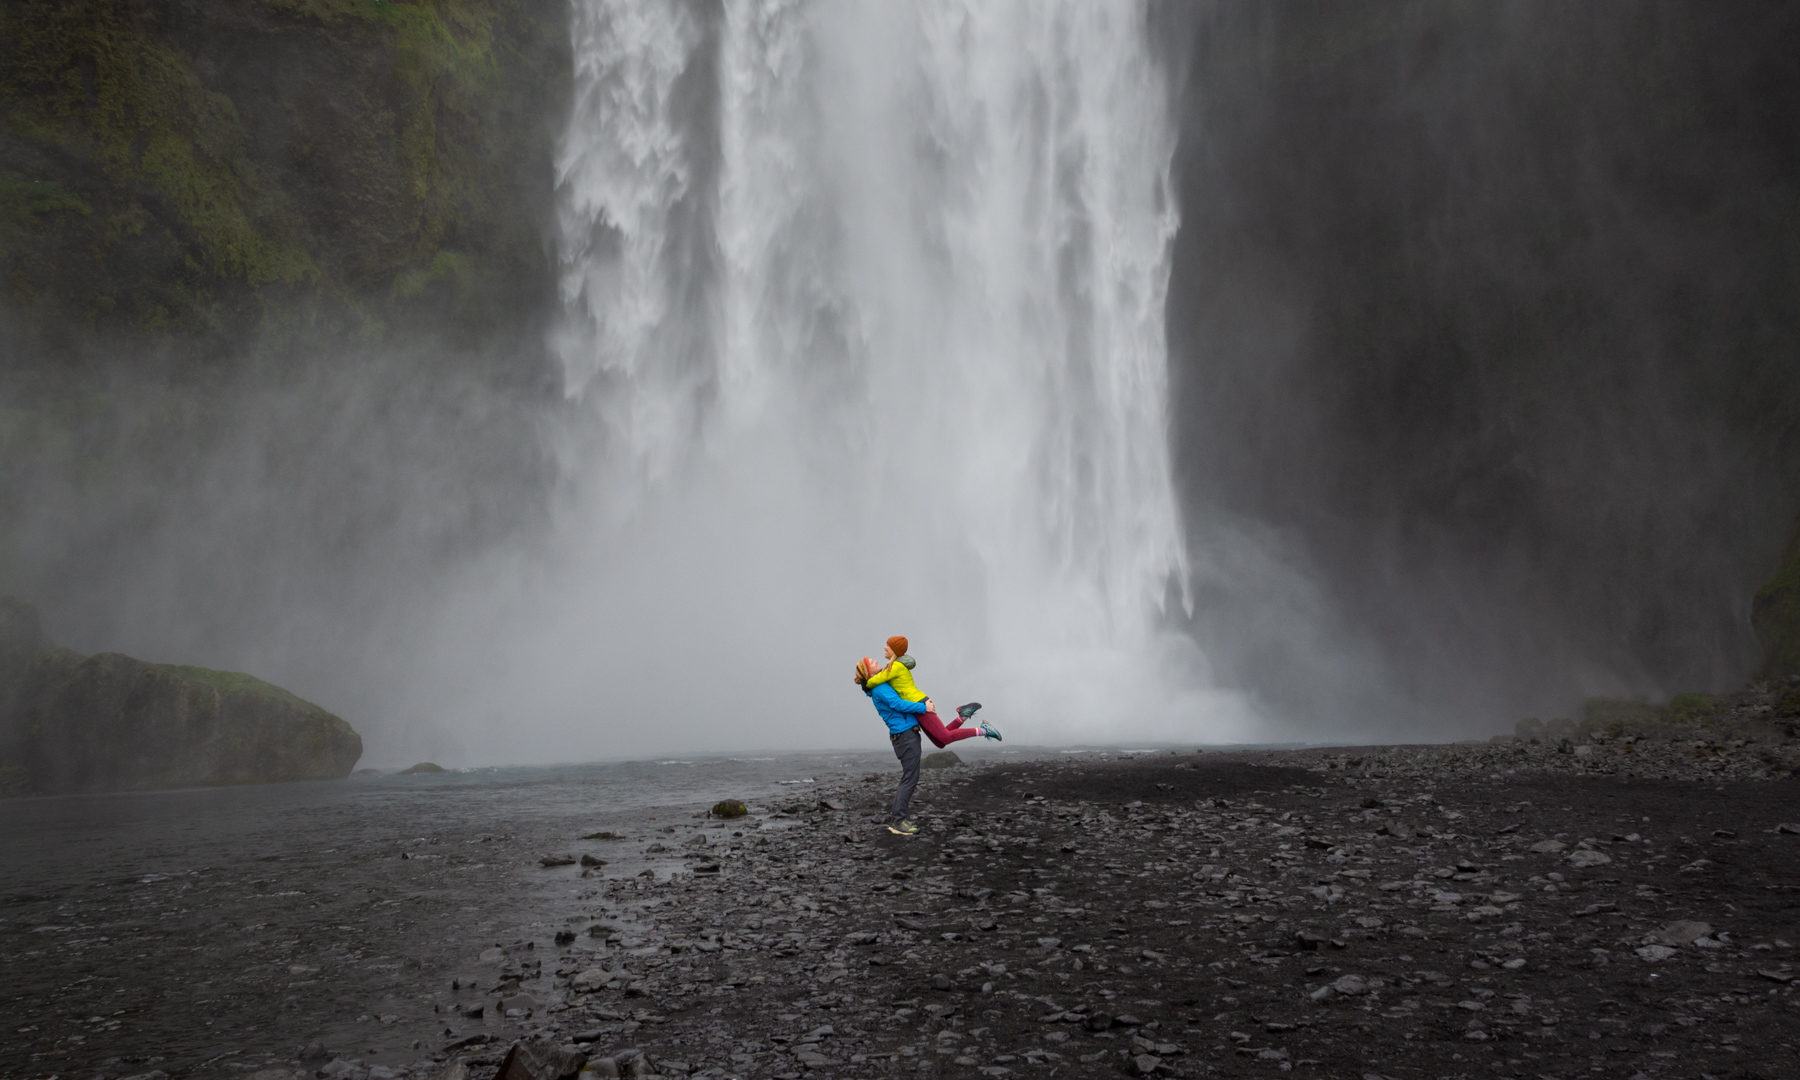 Nick Wheatley & Val Wheatleys Under a Waterfall in Iceland